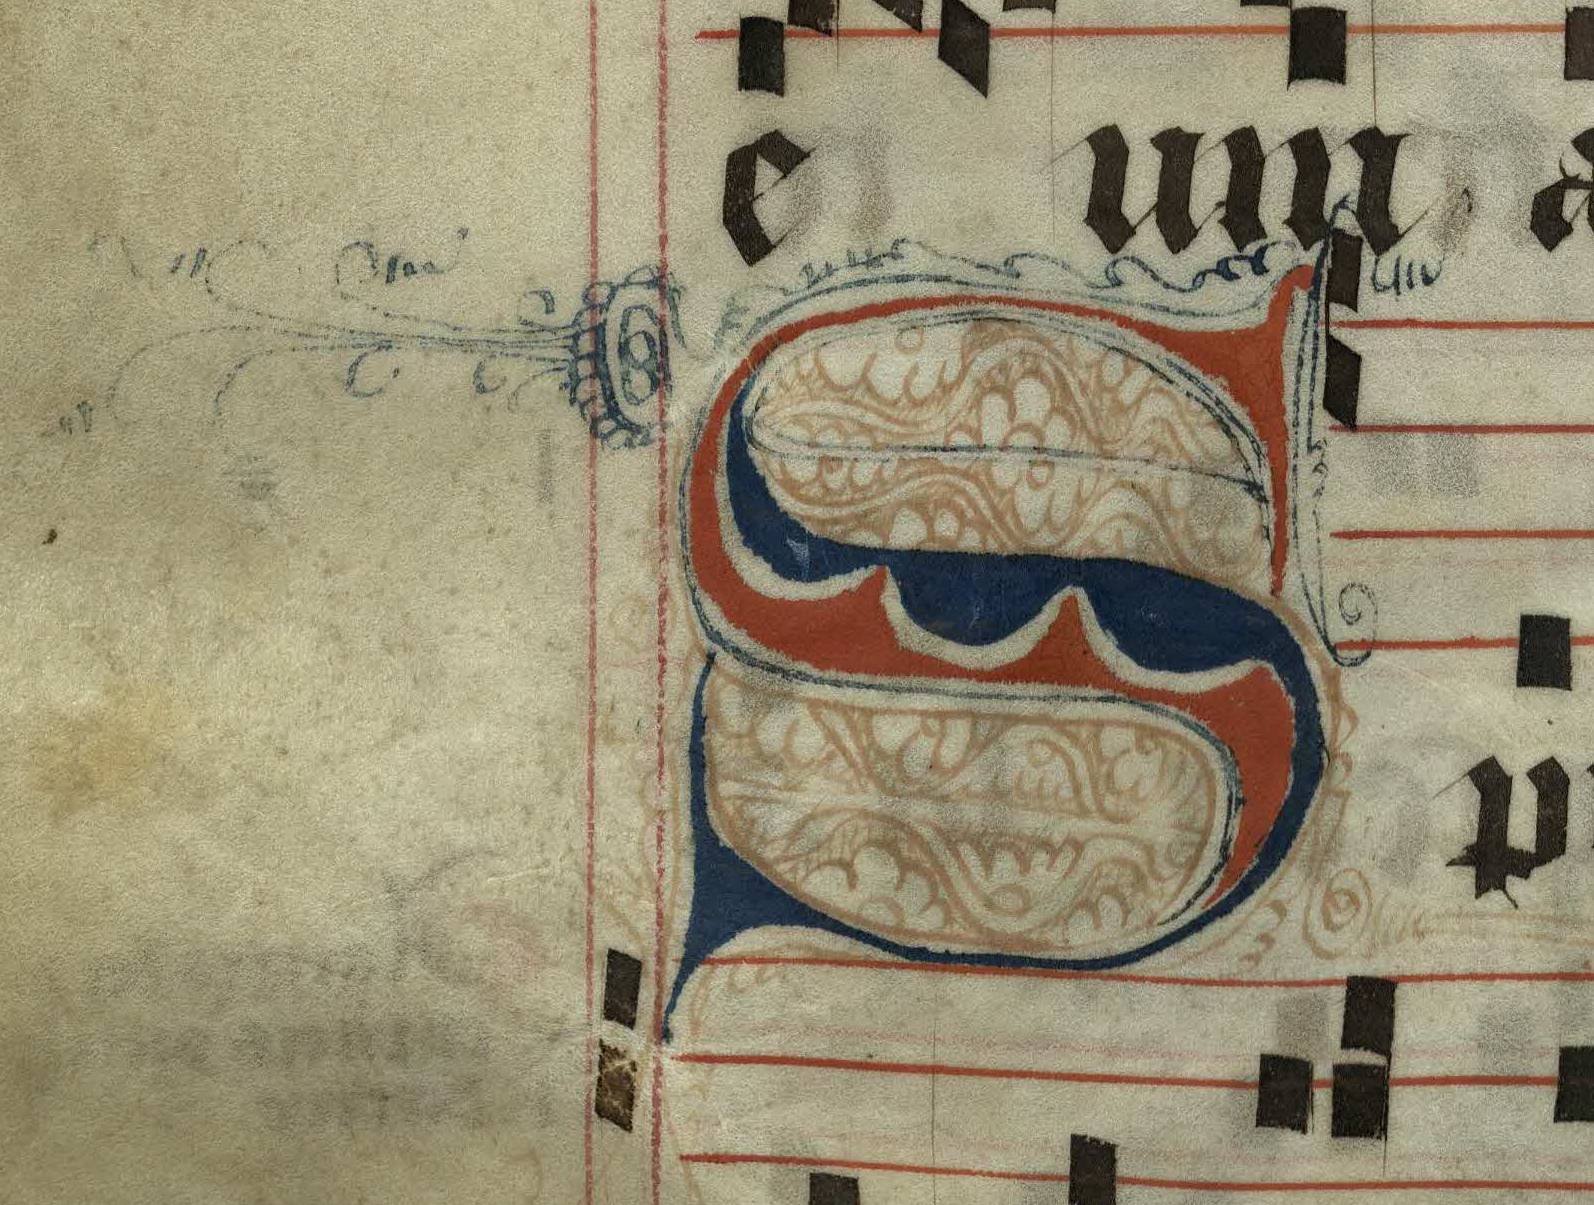 Pen decorated initial 'S' from p. 252 of a 15th century Gradual (St Andrews msM2148.G7)